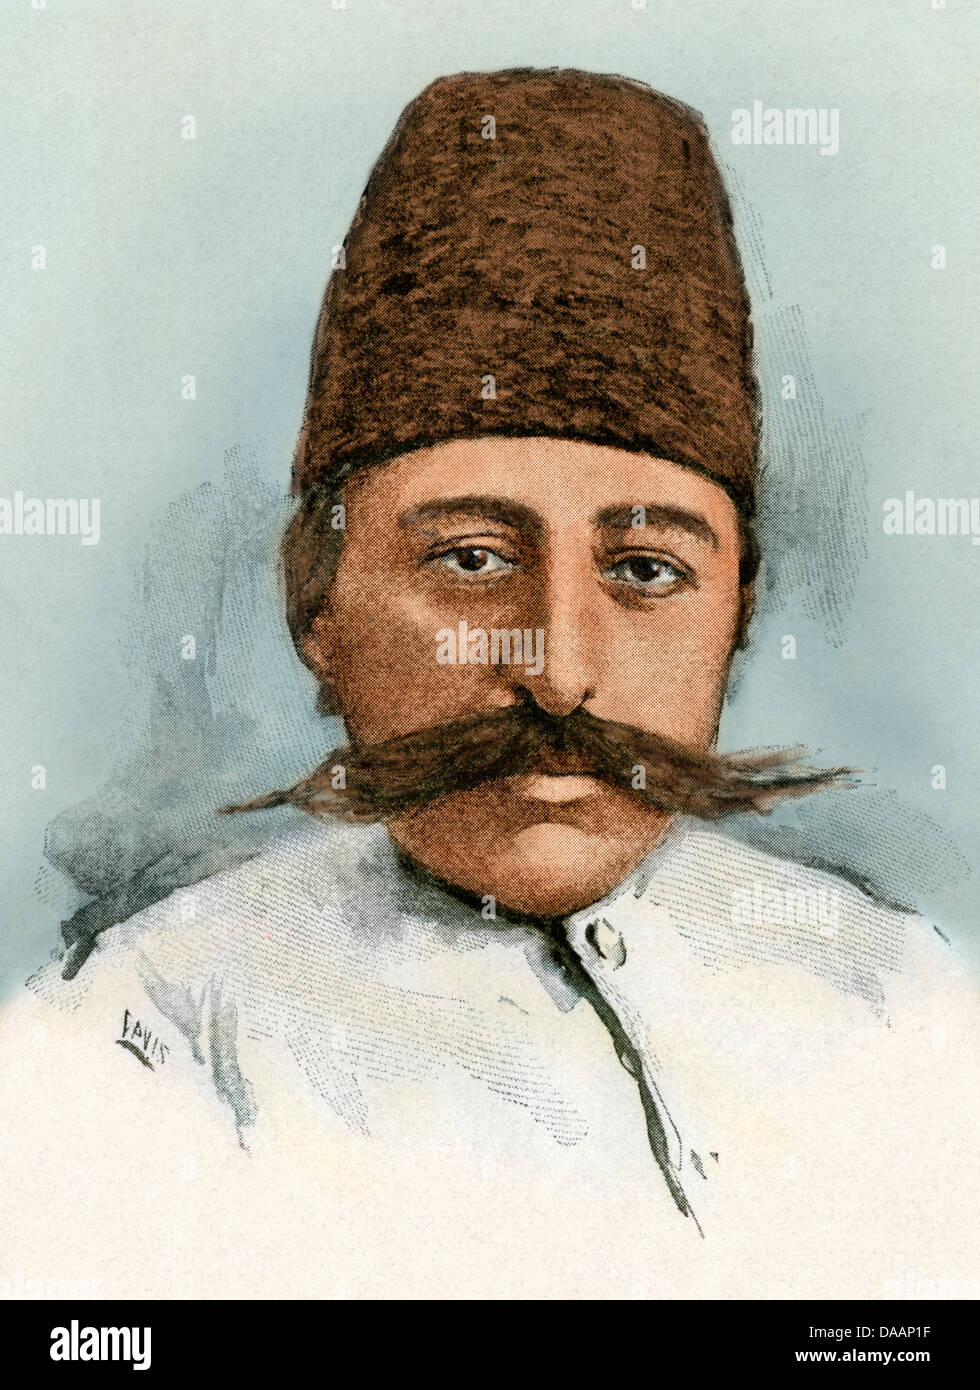 Mozaffar ad-Din Shah Qajar, Shah of Iran after assassination of his father in 1896. Hand-colored halftone of an illustration Stock Photo